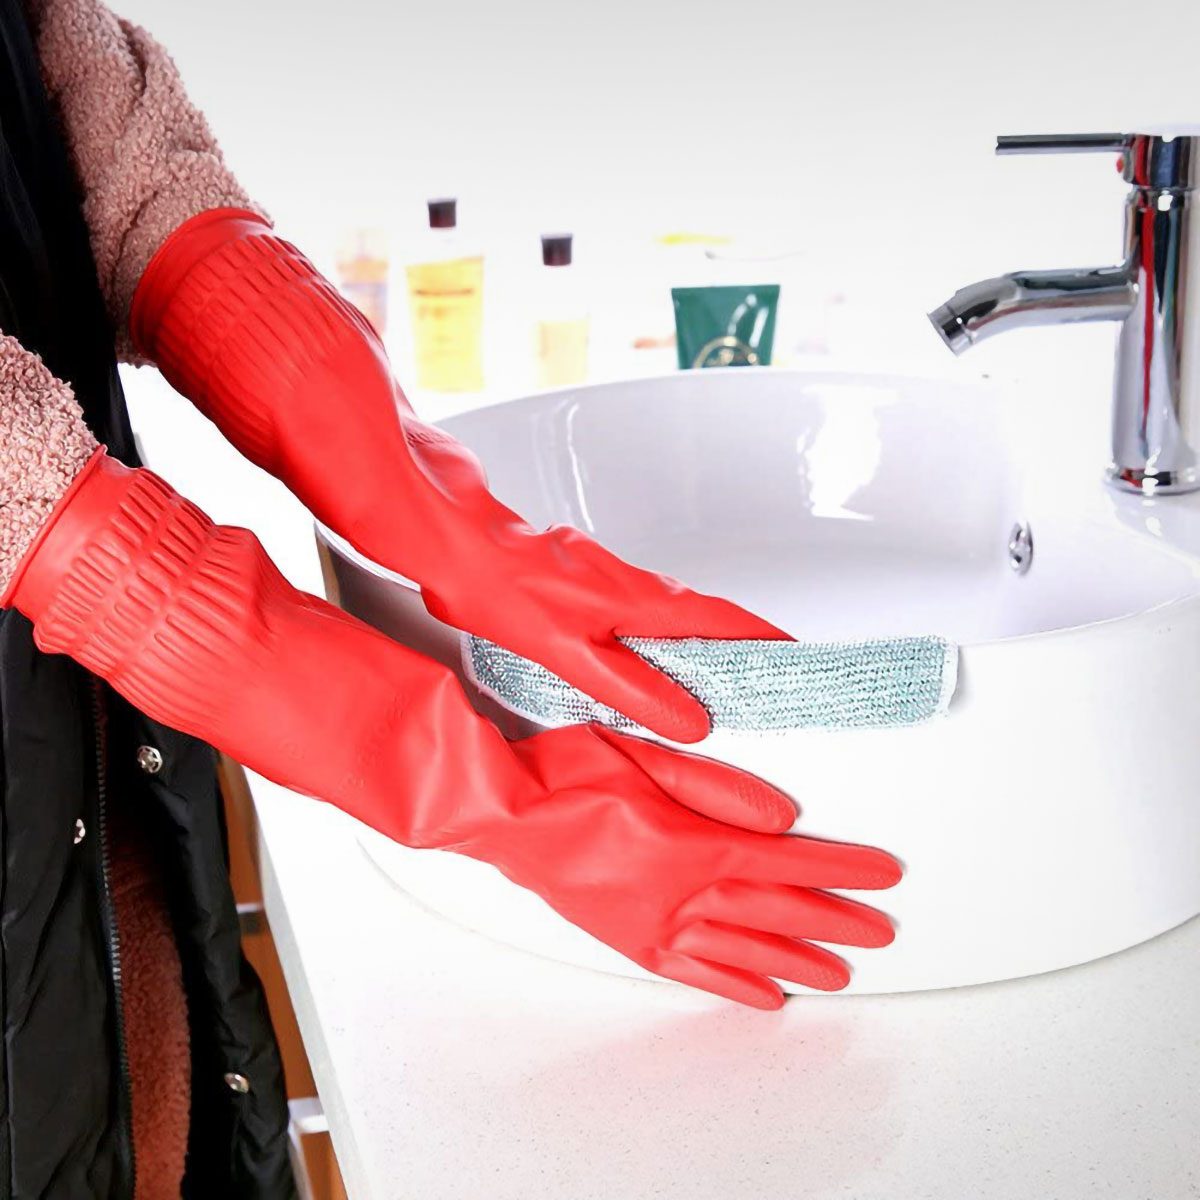 8 Dishwashing Gloves That Keep Hands Clean and Dry